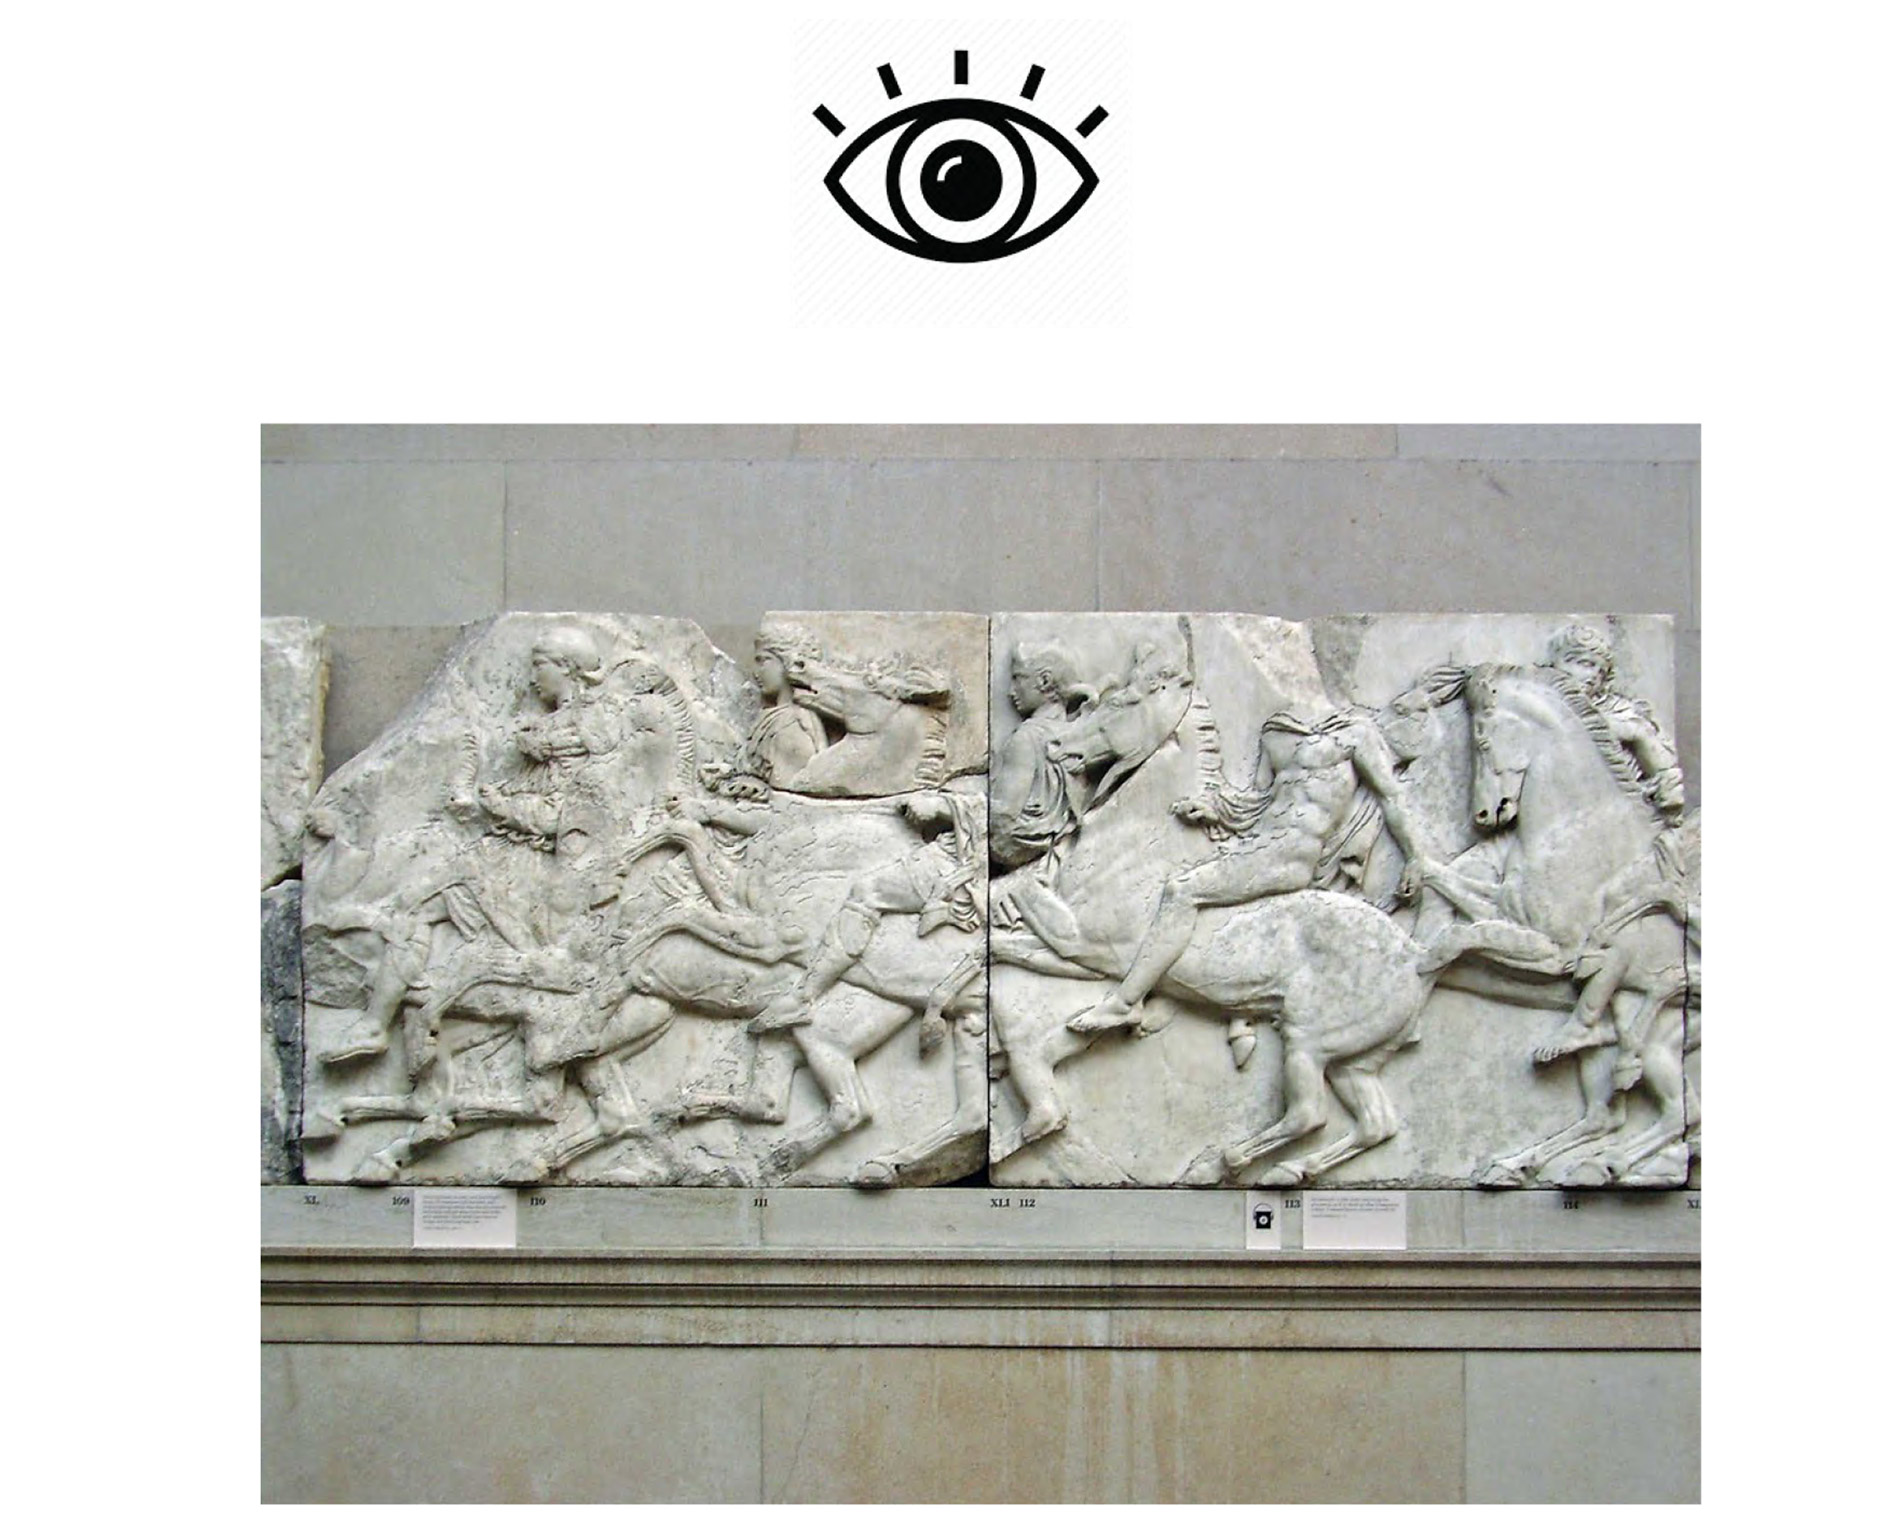 Photograph of “Panatheanic” Frieze from Parthenon